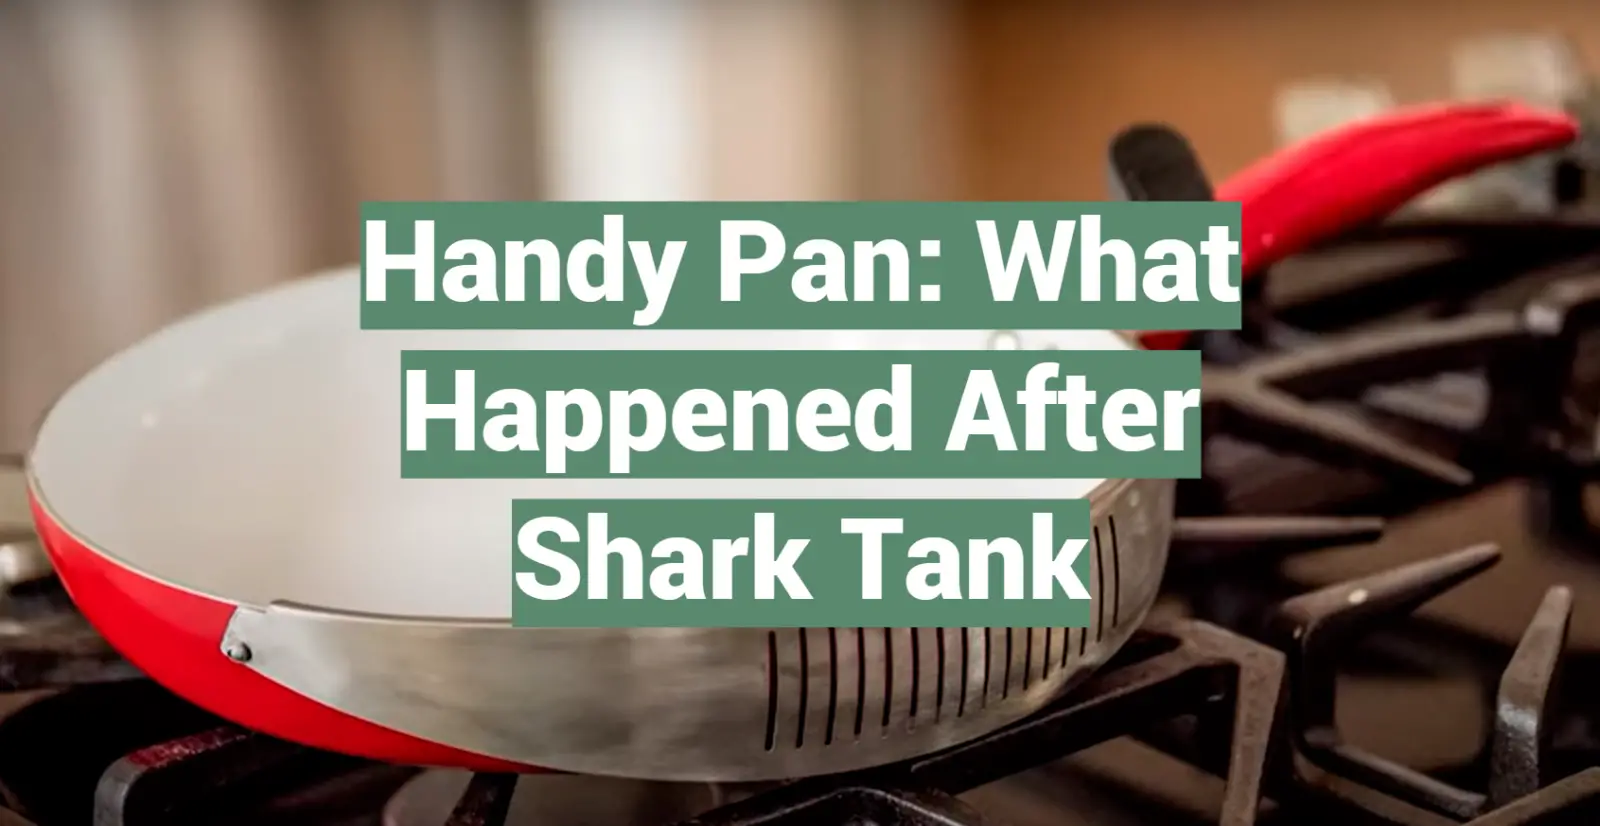 Handy Pan: What Happened After Shark Tank